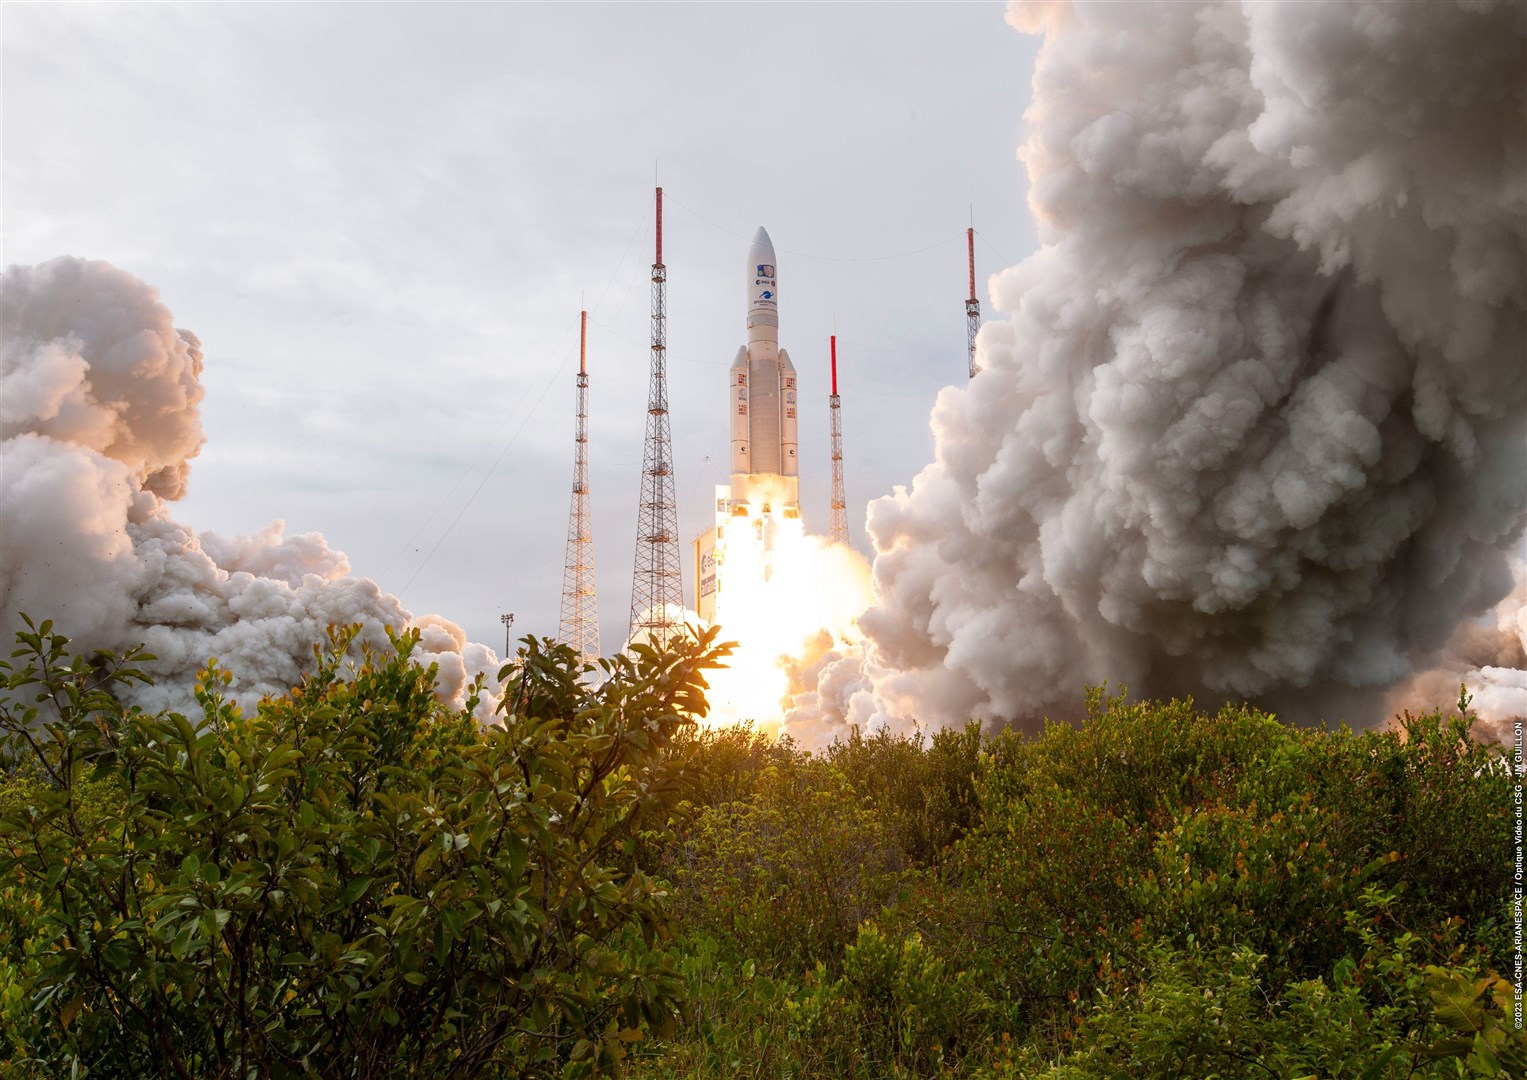 Juice,blasting off on an Ariane 5 rocket from the European spaceport in Kourou, French Guiana (ESA)